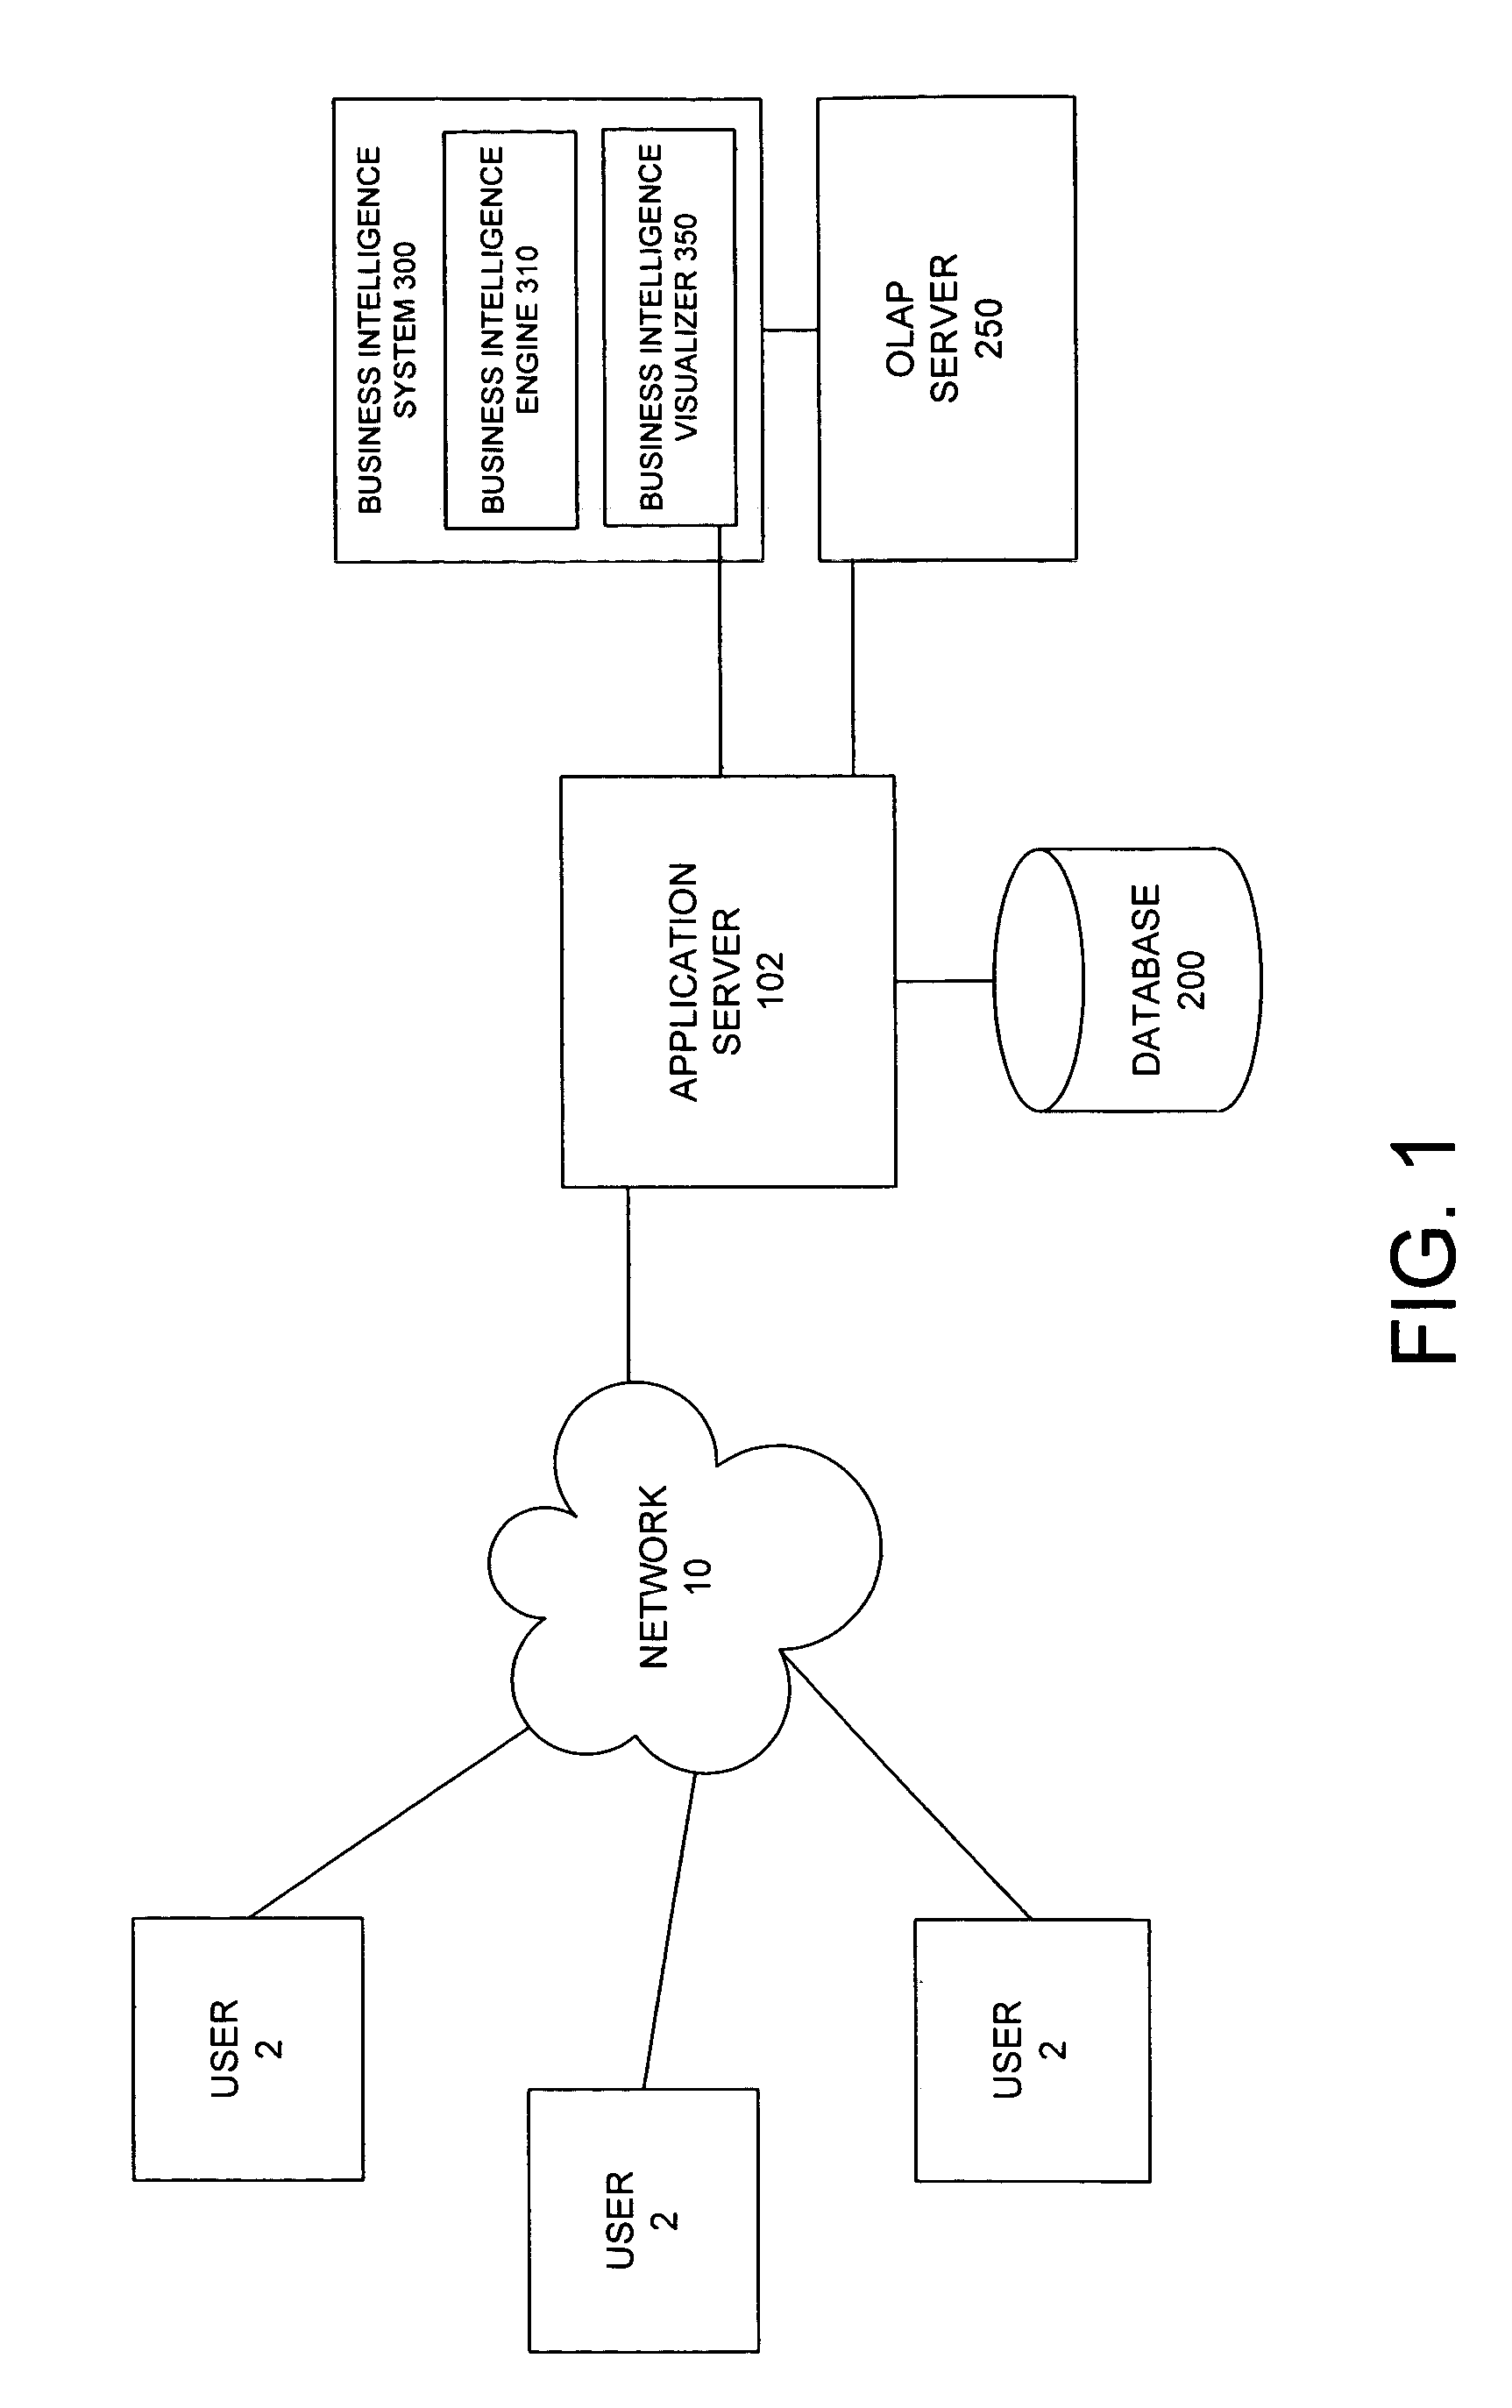 System and method for deriving and visualizing business intelligence data